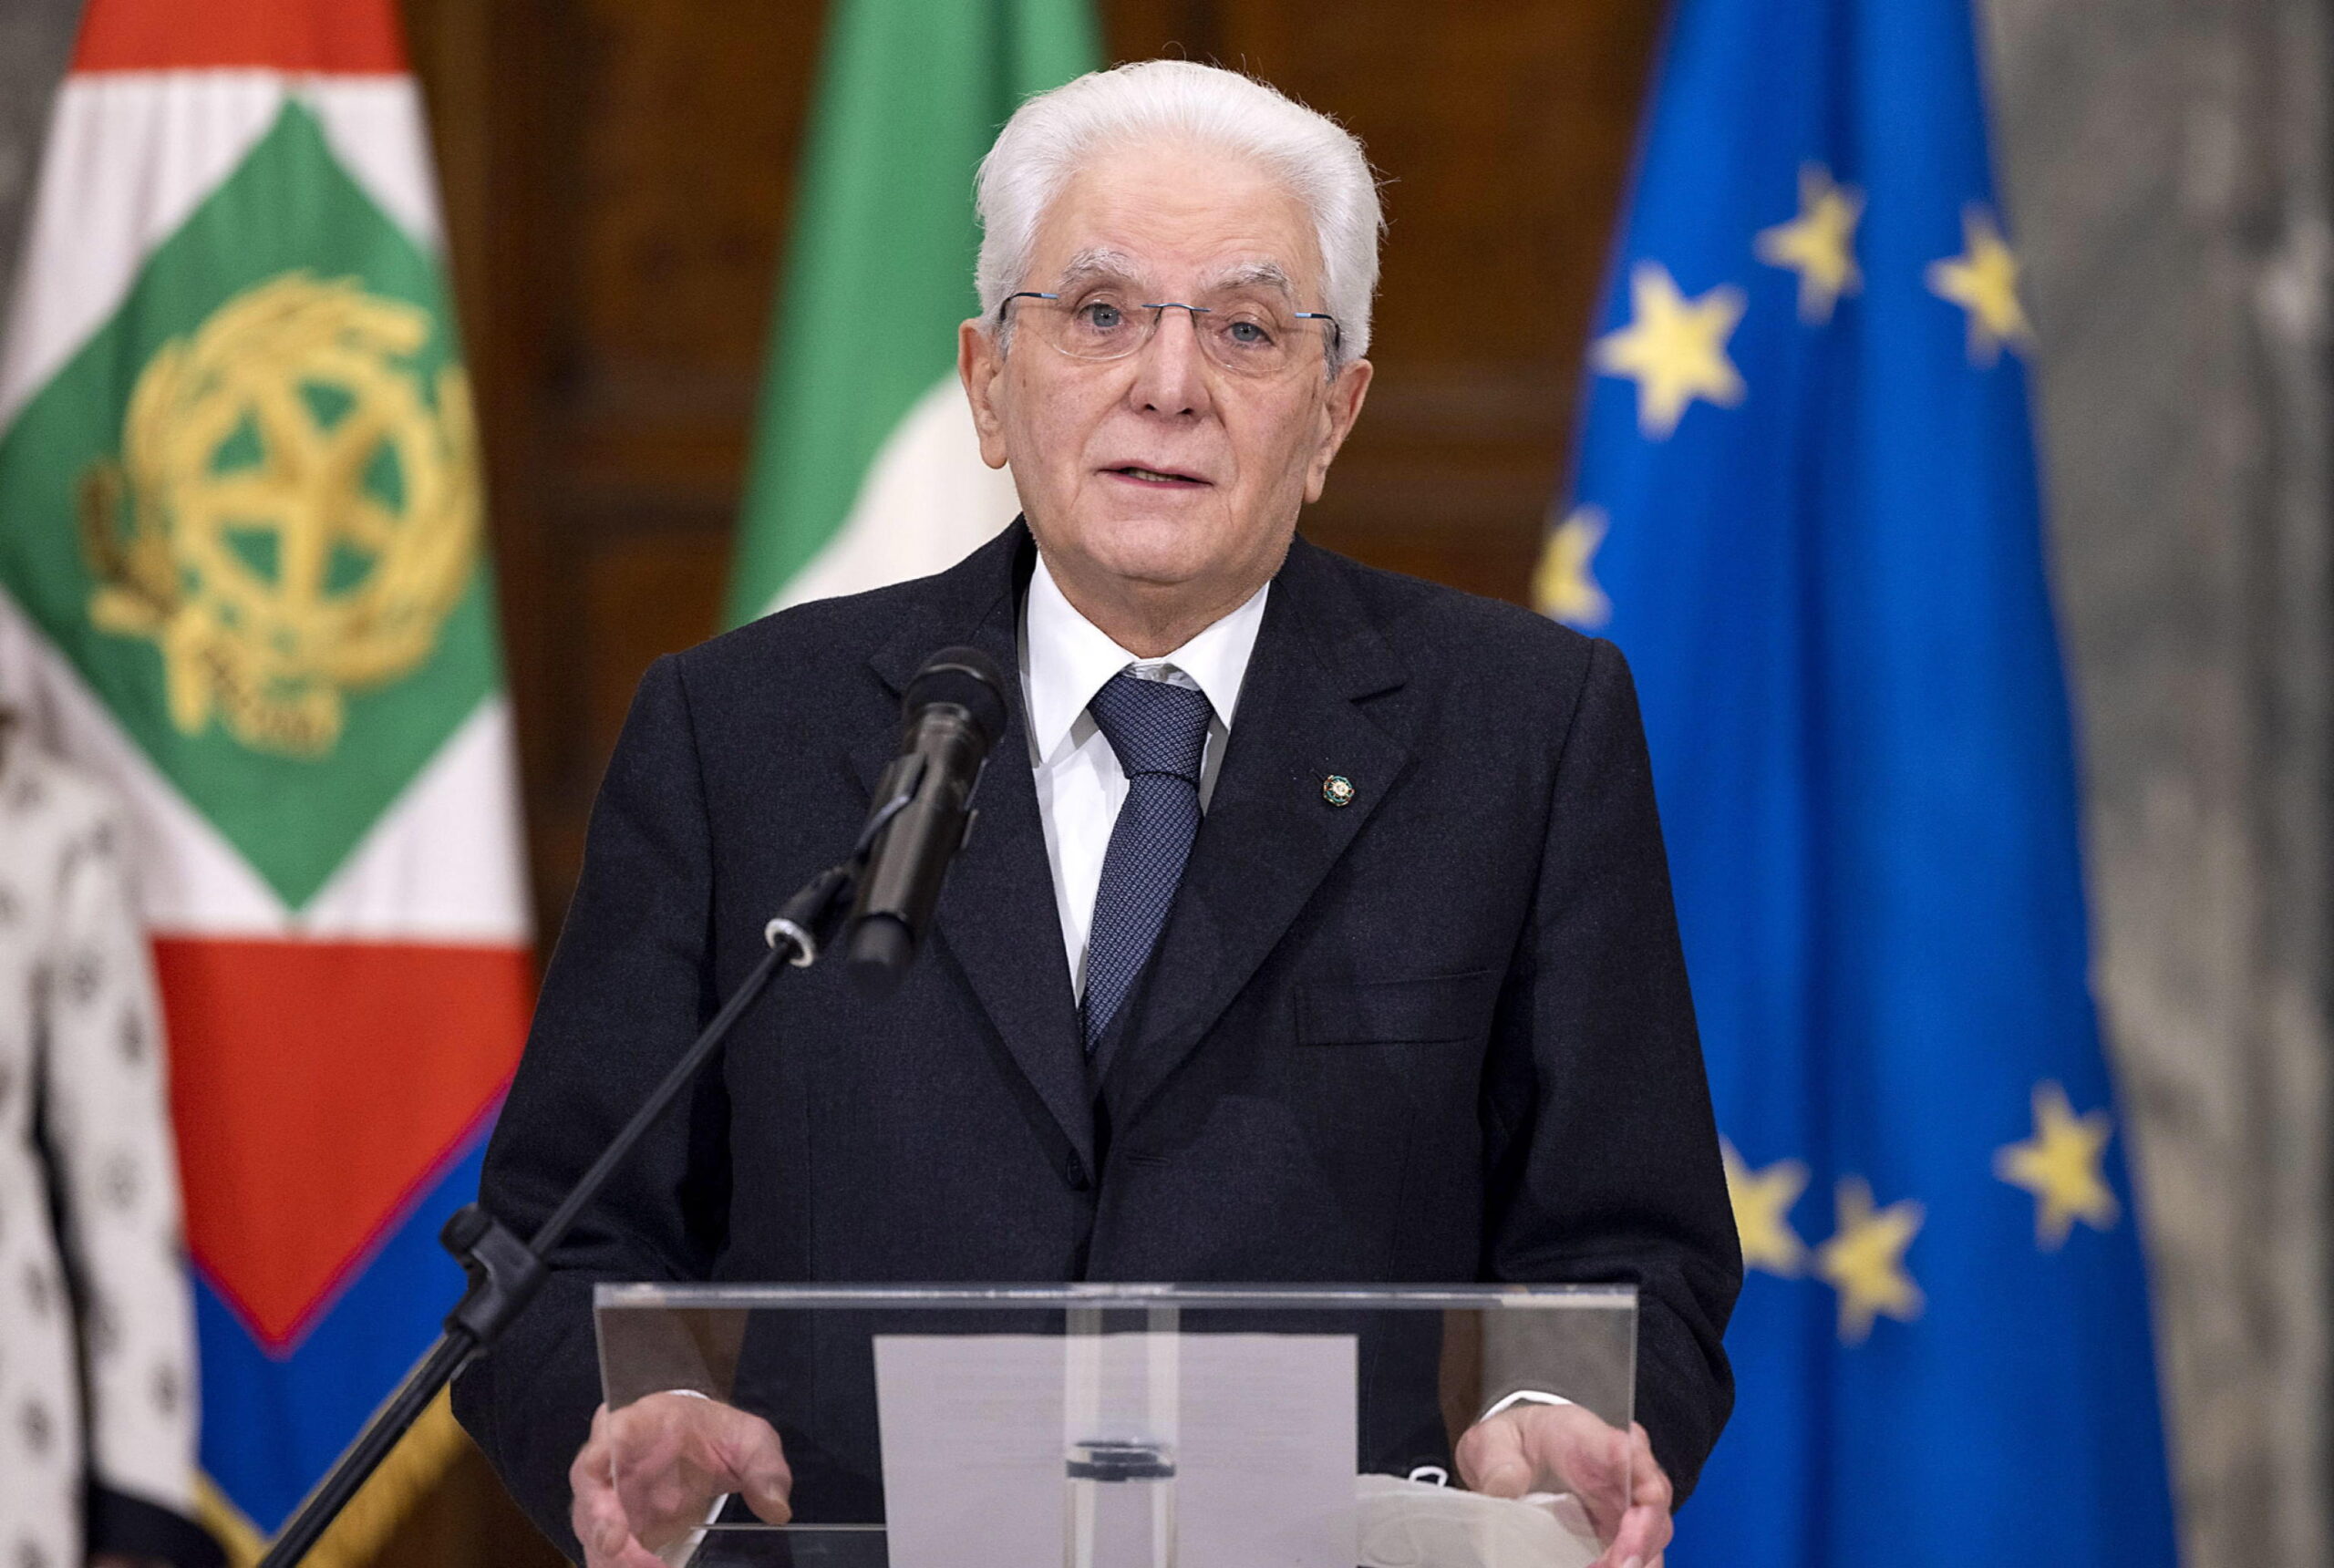 epa09717165 A handout photo made available by Quirinale Palace Press Office shows re-elected Italian President, Sergio Mattarella, talks on the occasion of the communication of the outcome of the vote for his election of the President of the Republic at the Quirinale Palace in Rome, Italy, 29 January 2022. Sergio Mattarella was re-elected on the eighth ballot of MPs, Senators and regional representatives after seven votes forced political parties to ask the outgoing head of state to rethink his retirement plans. Mattarella got 759 votes out of a total of 983 voters, compared to the 665 or 65.9percent he garnered in his first election in 2015.  EPA/QUIRINALE PALACE PRESS OFFICE/PA HANDOUT  HANDOUT EDITORIAL USE ONLY/NO SALES